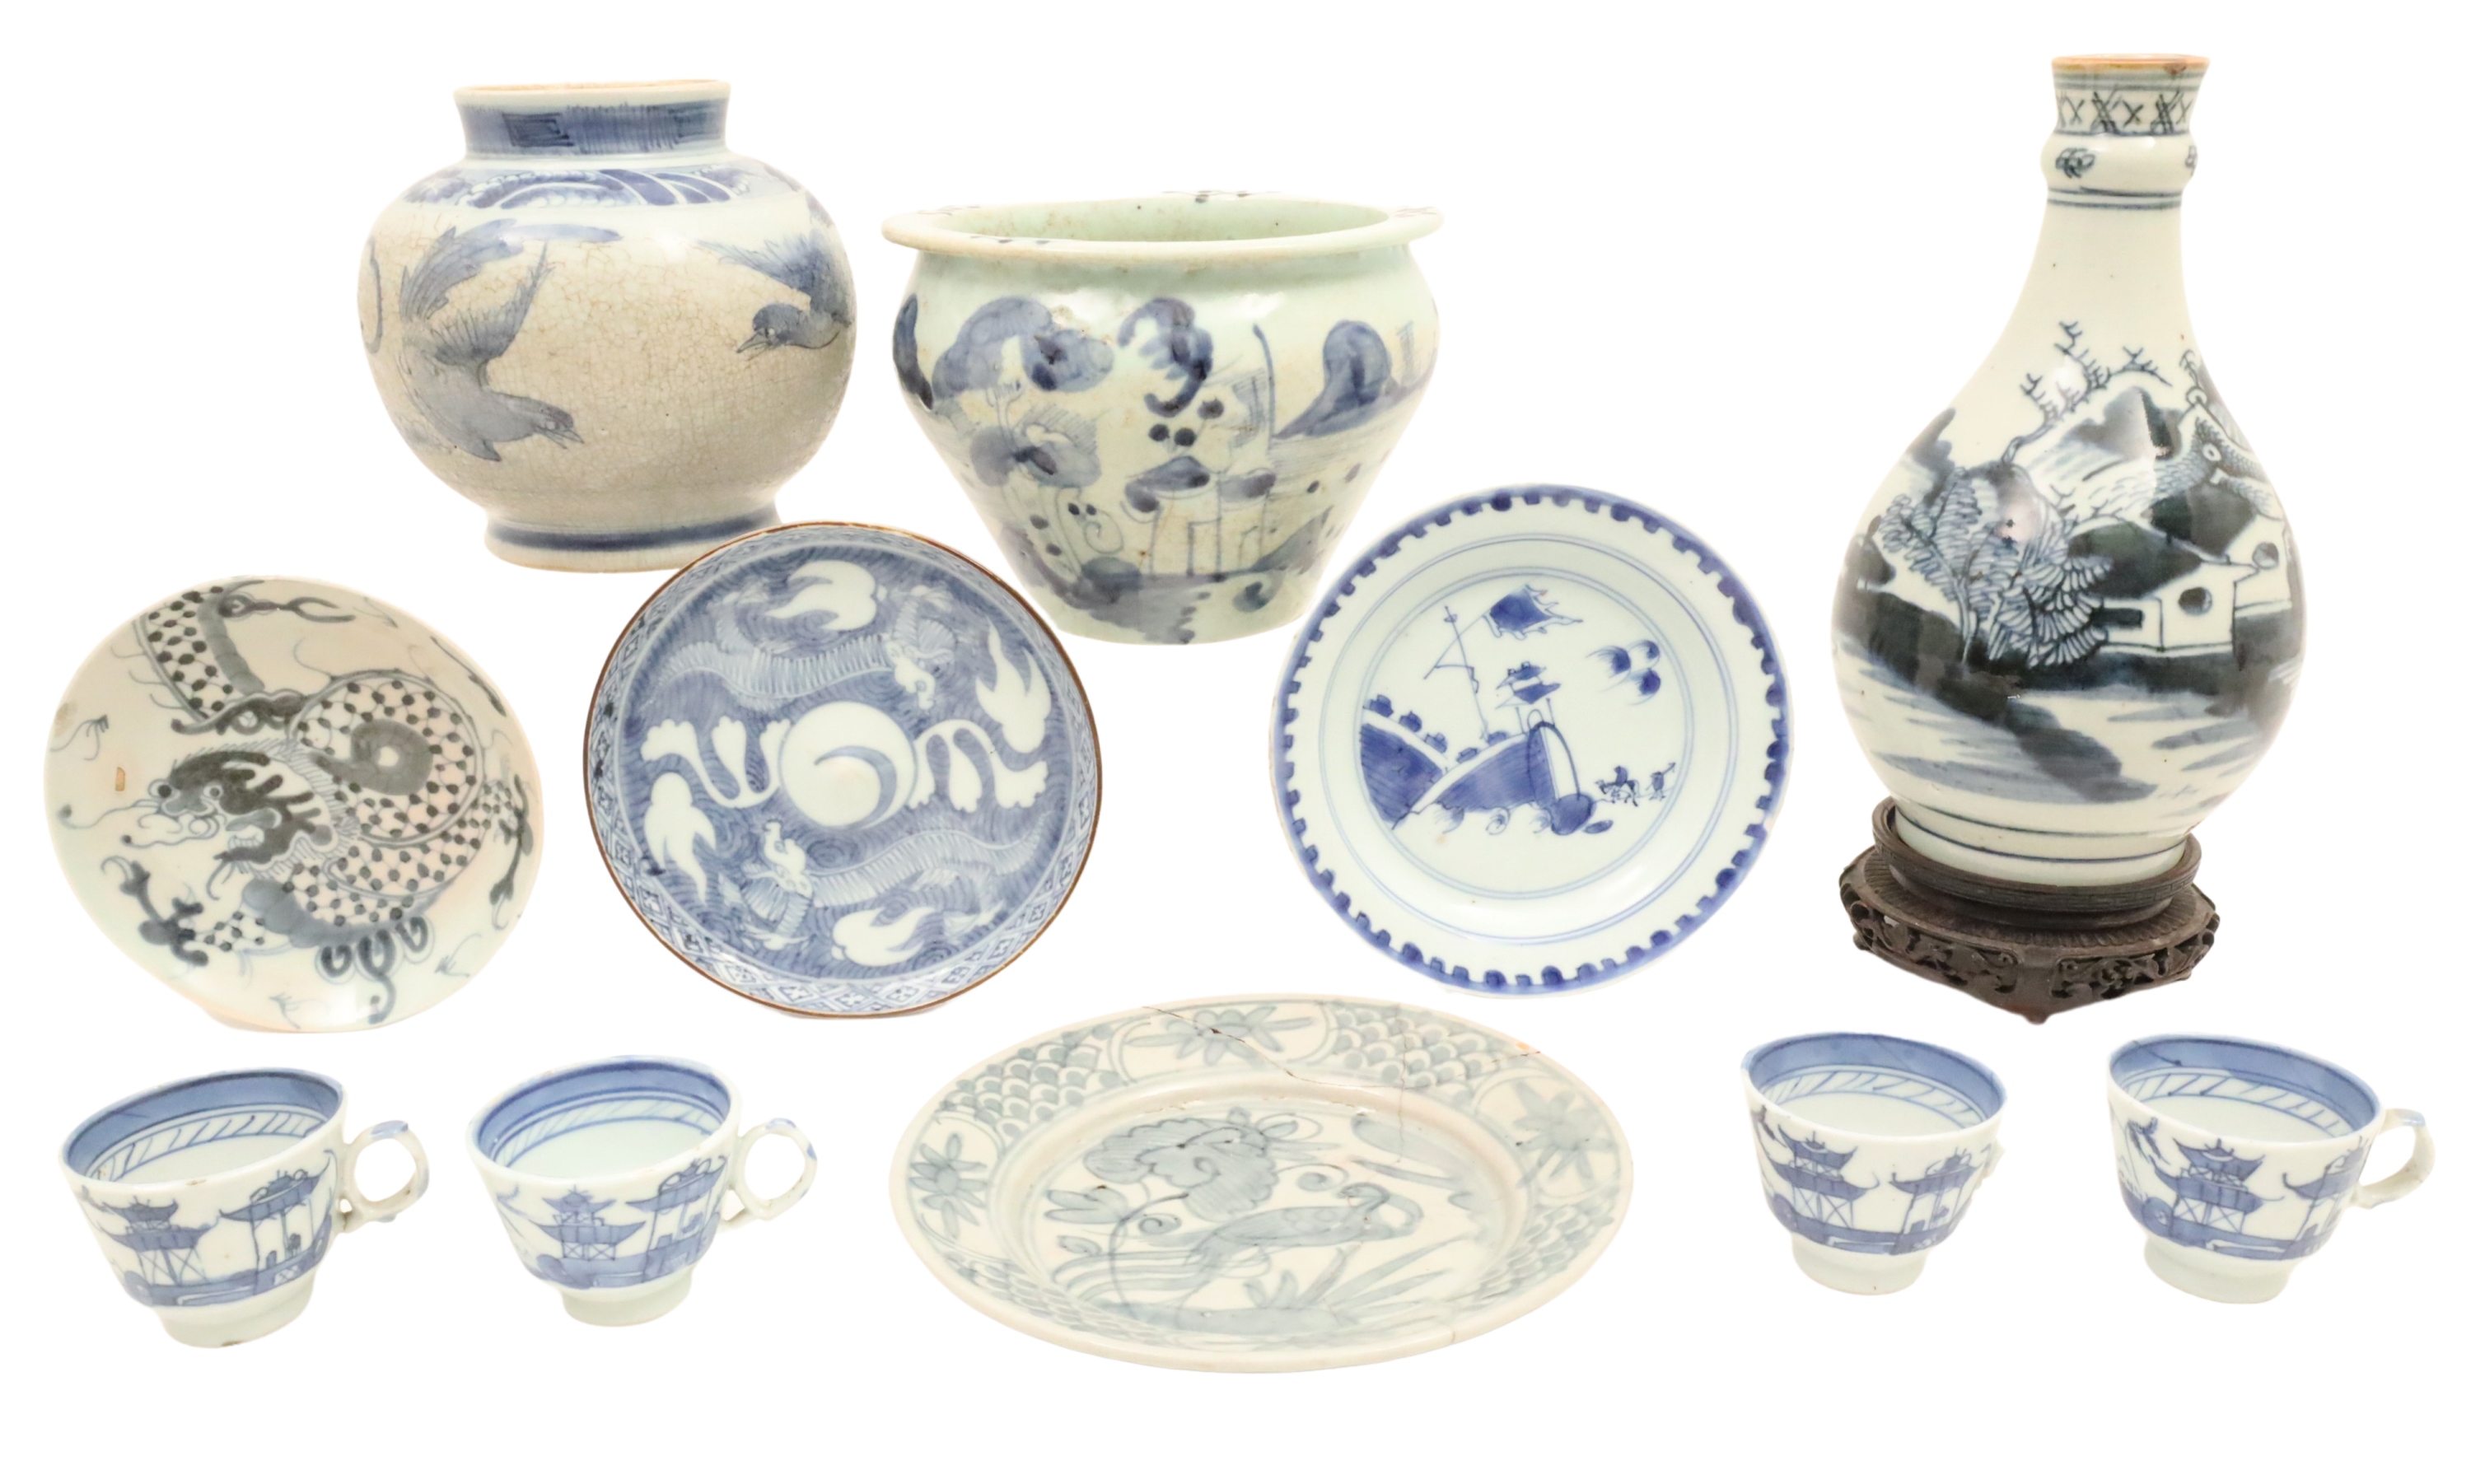 11 PCS OF ORIENTAL BLUE AND WHITE 2f9141